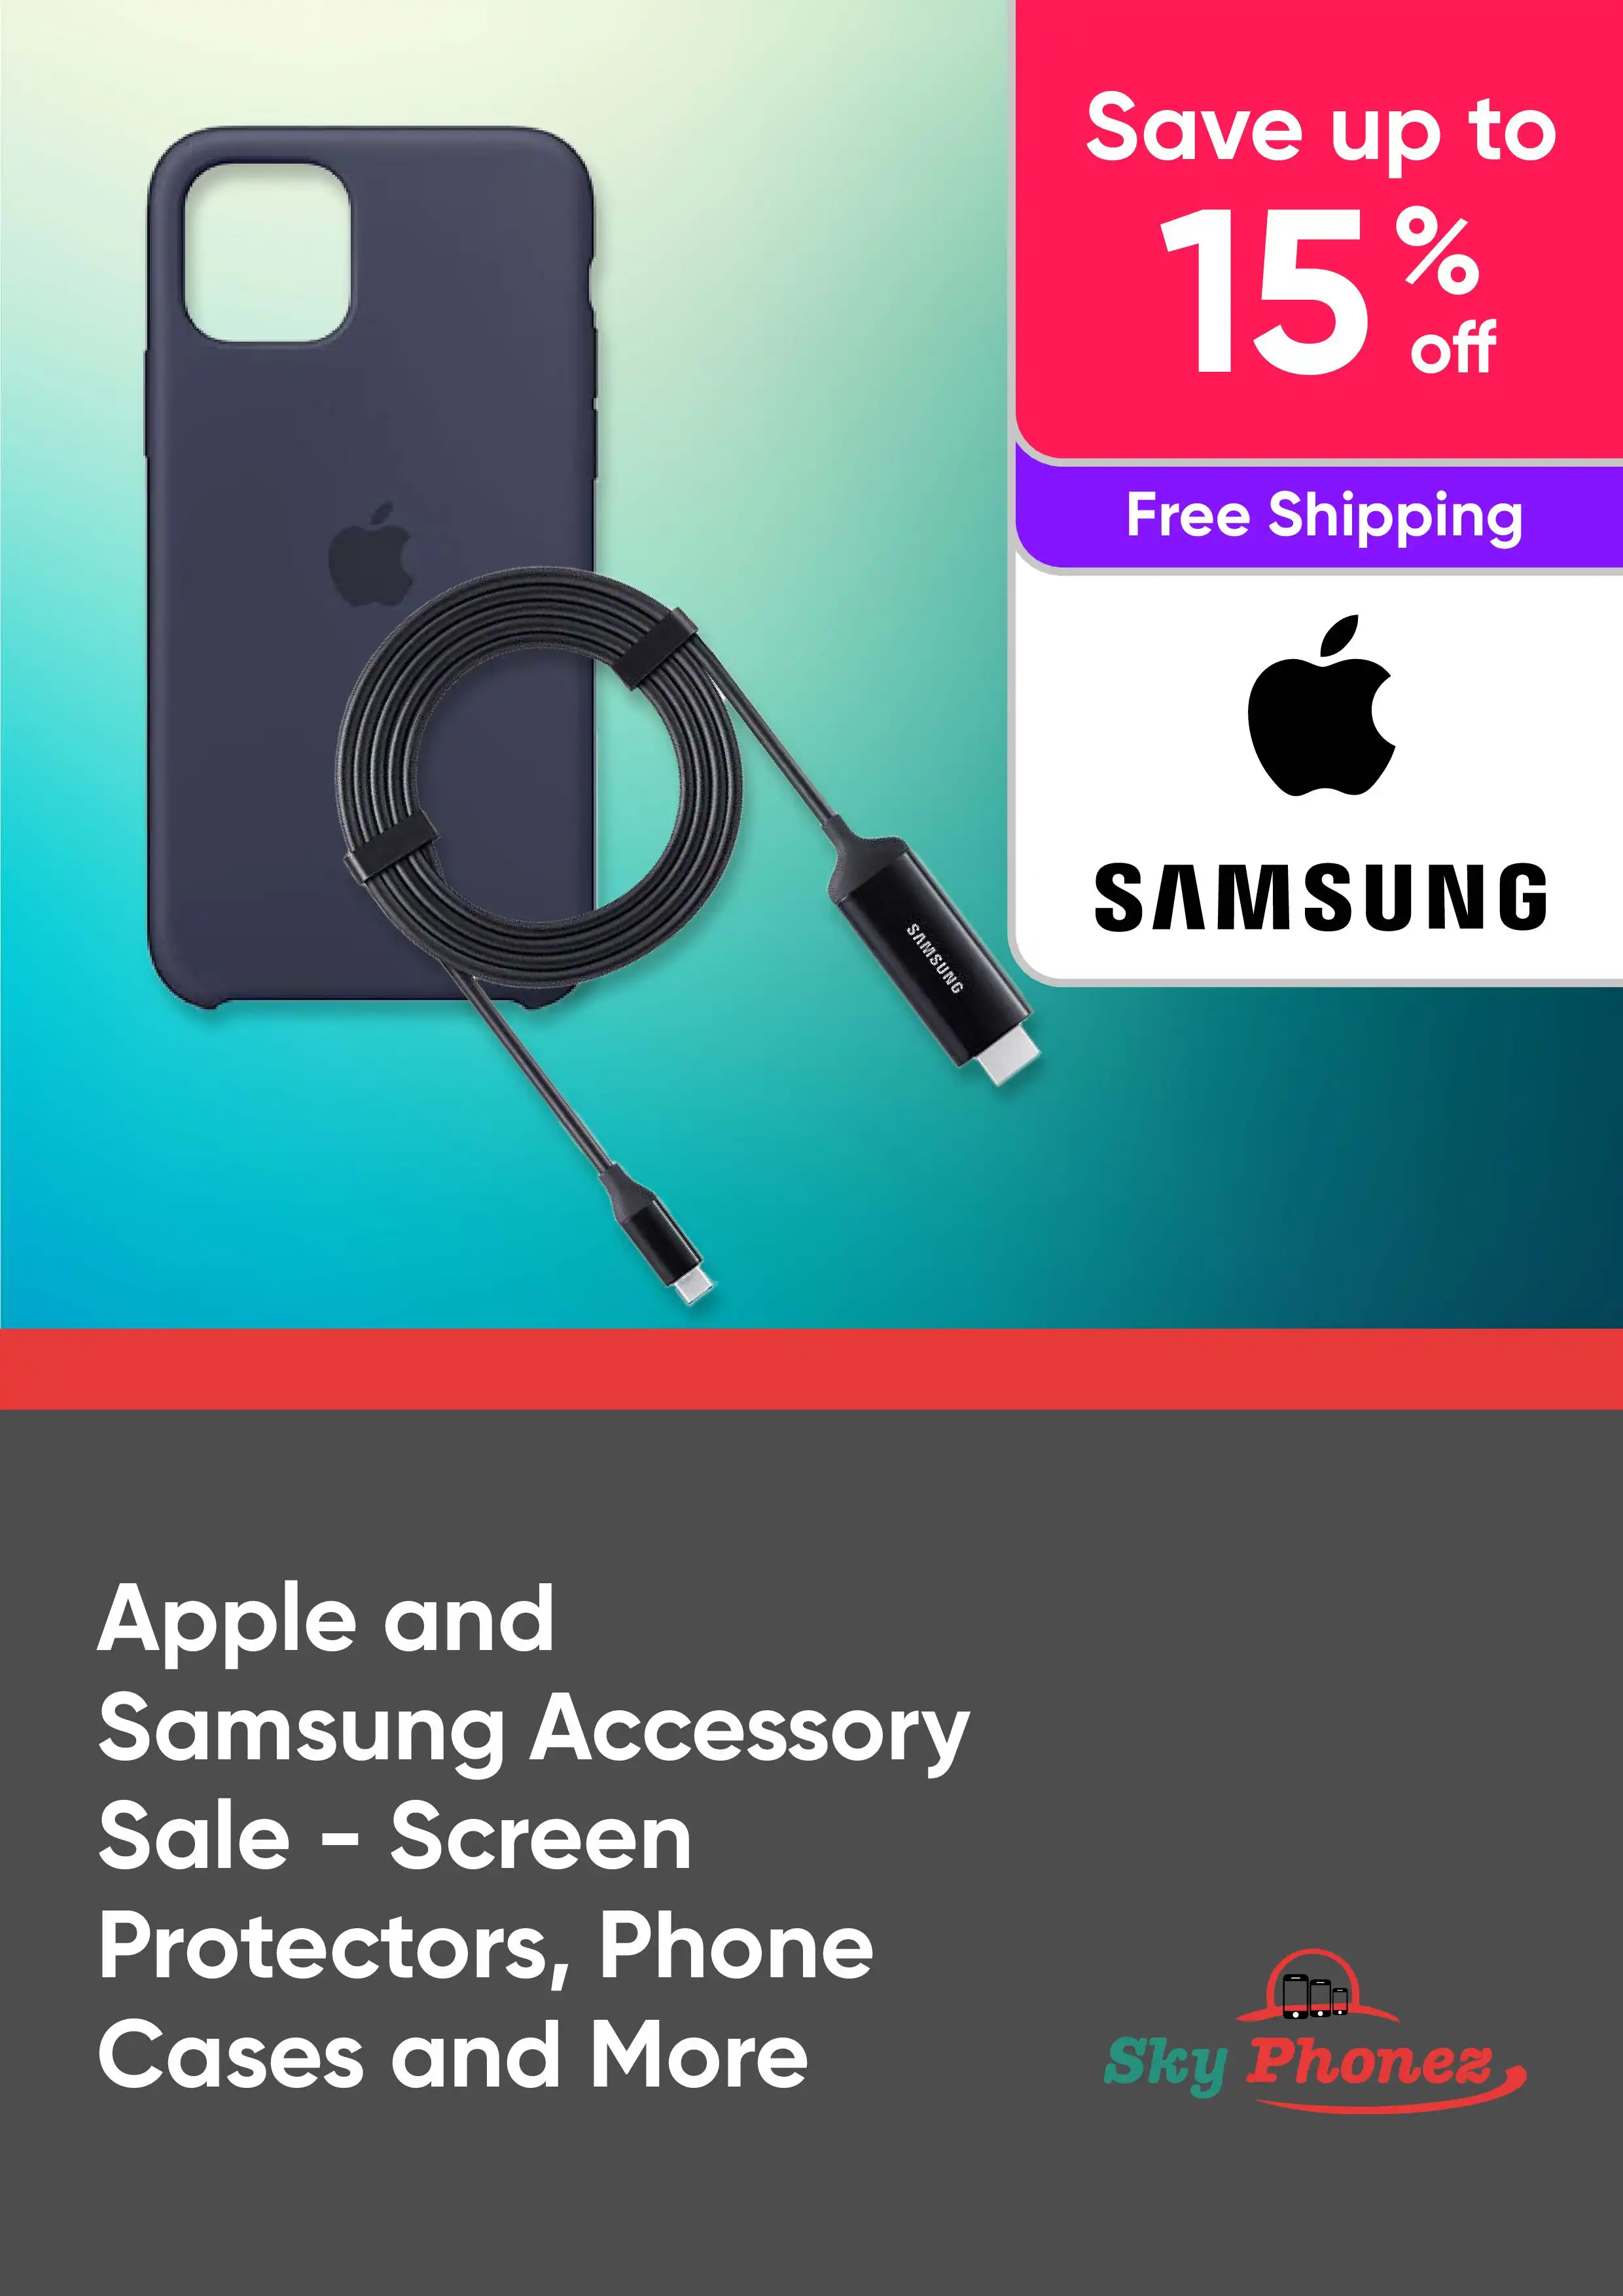 Apple and Samsung Accessory Sale - Screen Protectors, Phone Cases and More - Up to 15% off